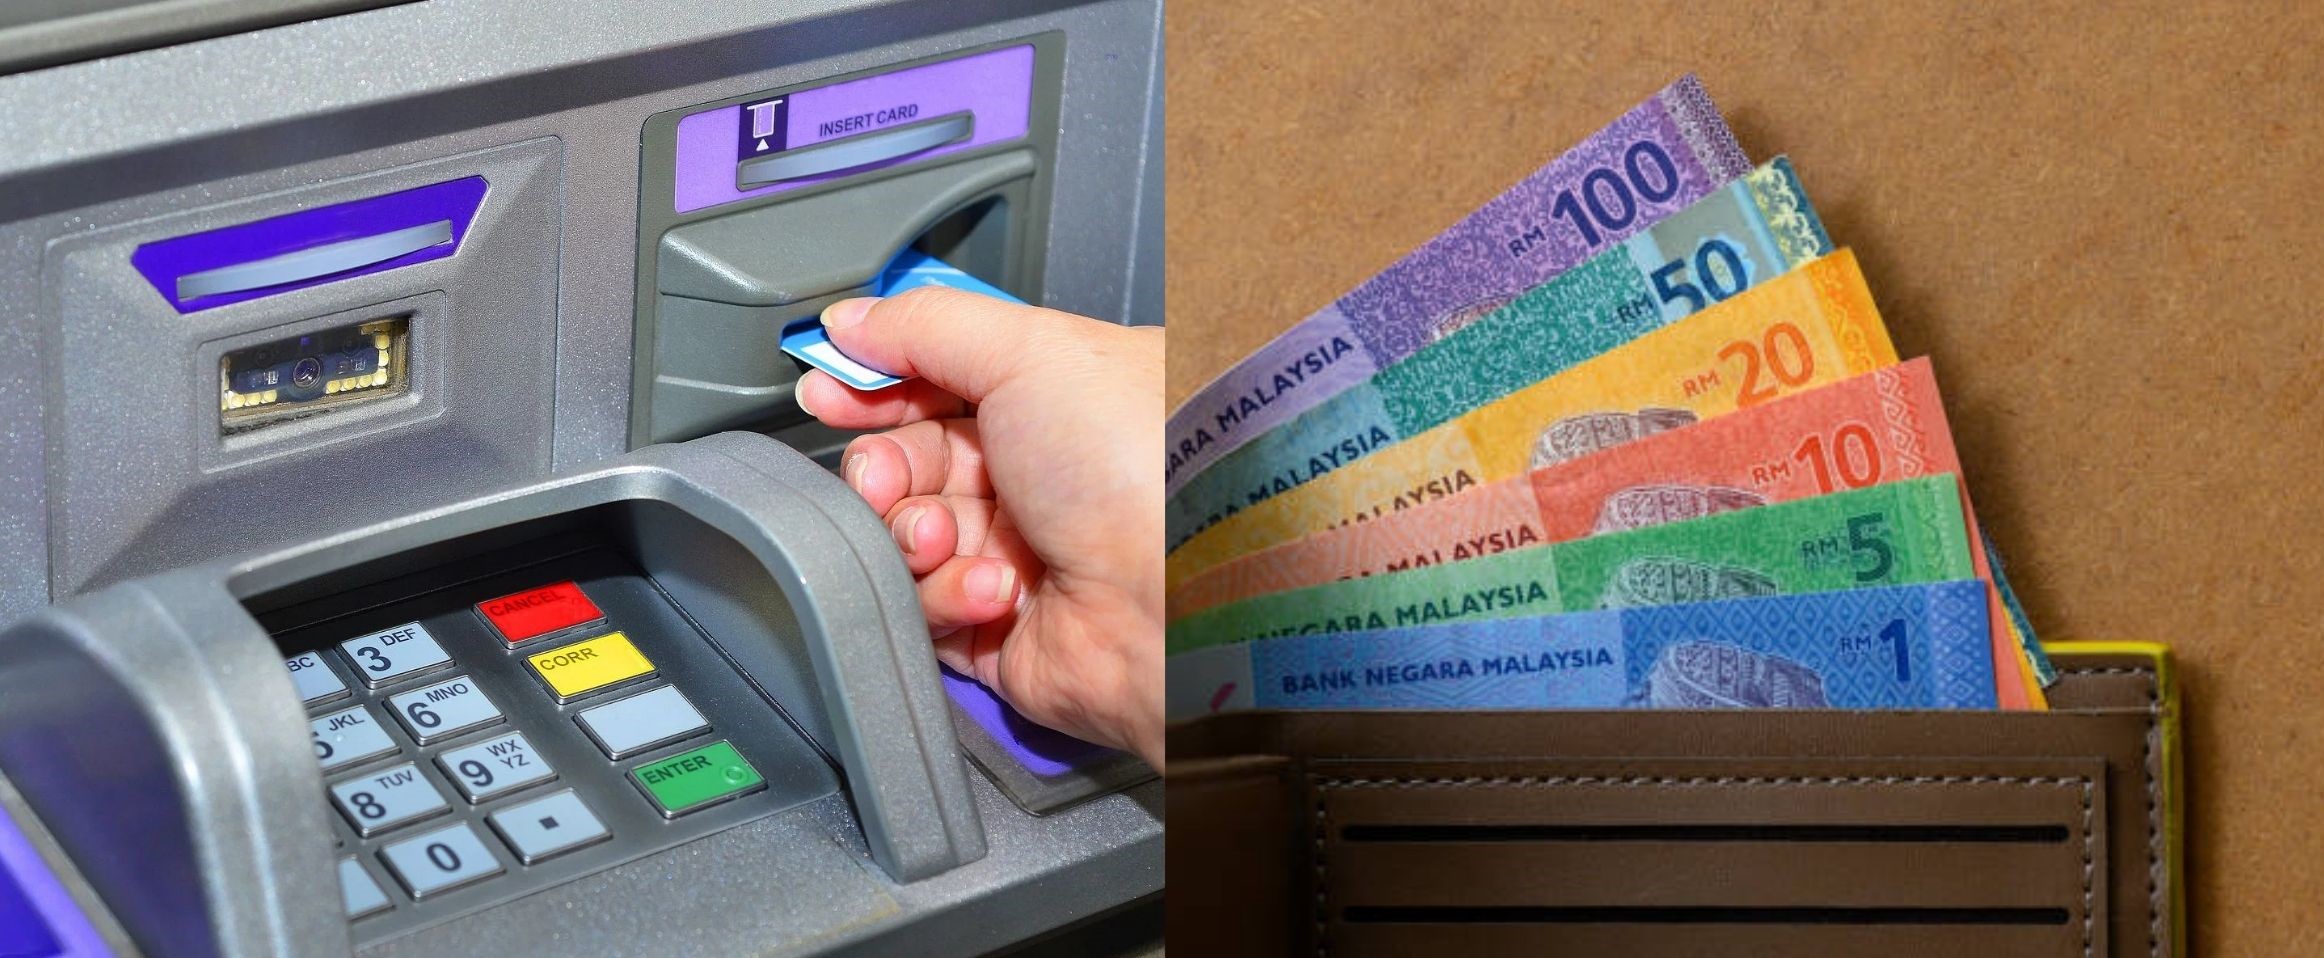 No more inter-bank withdrawals everyone, reports say that the RM1 fee will return effective 1 February 2022.